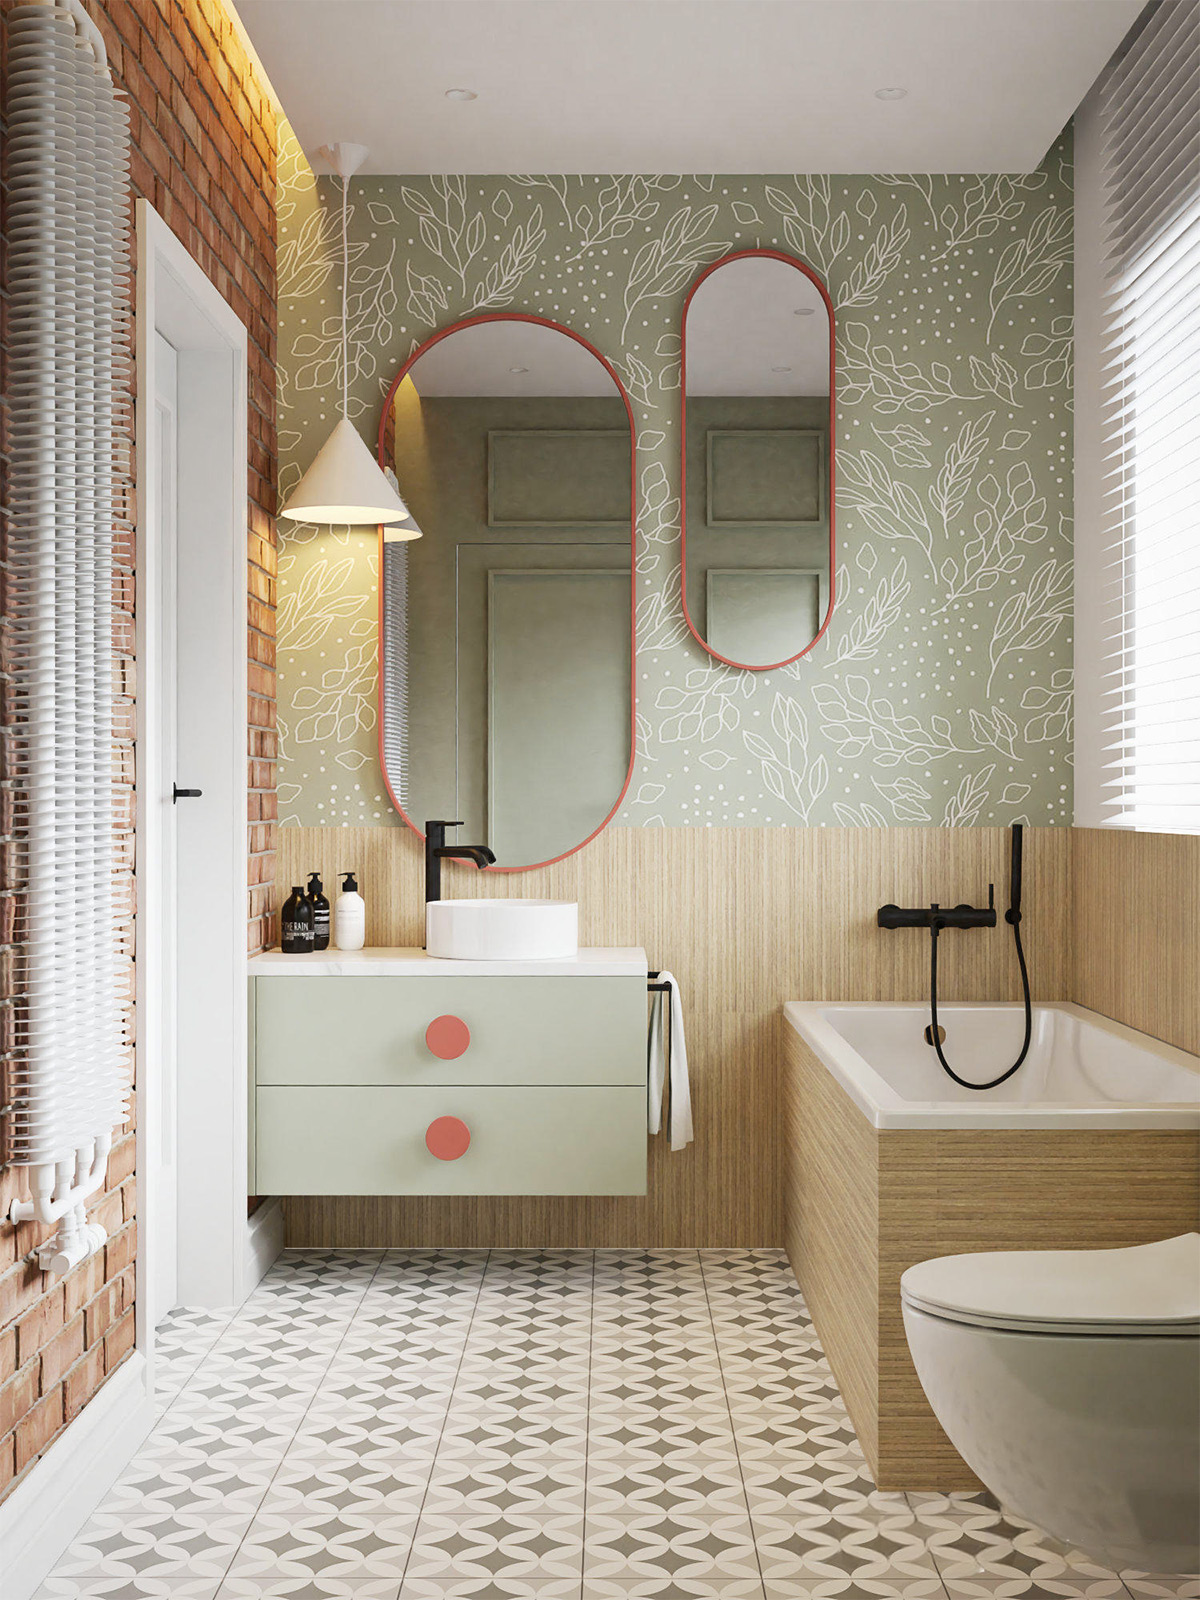 Racetrack-shaped bathroom mirrors place contrasting coral accents onto sage green wallpaper. Coral hardware continues the warming accent onto a pale green vanity unit.